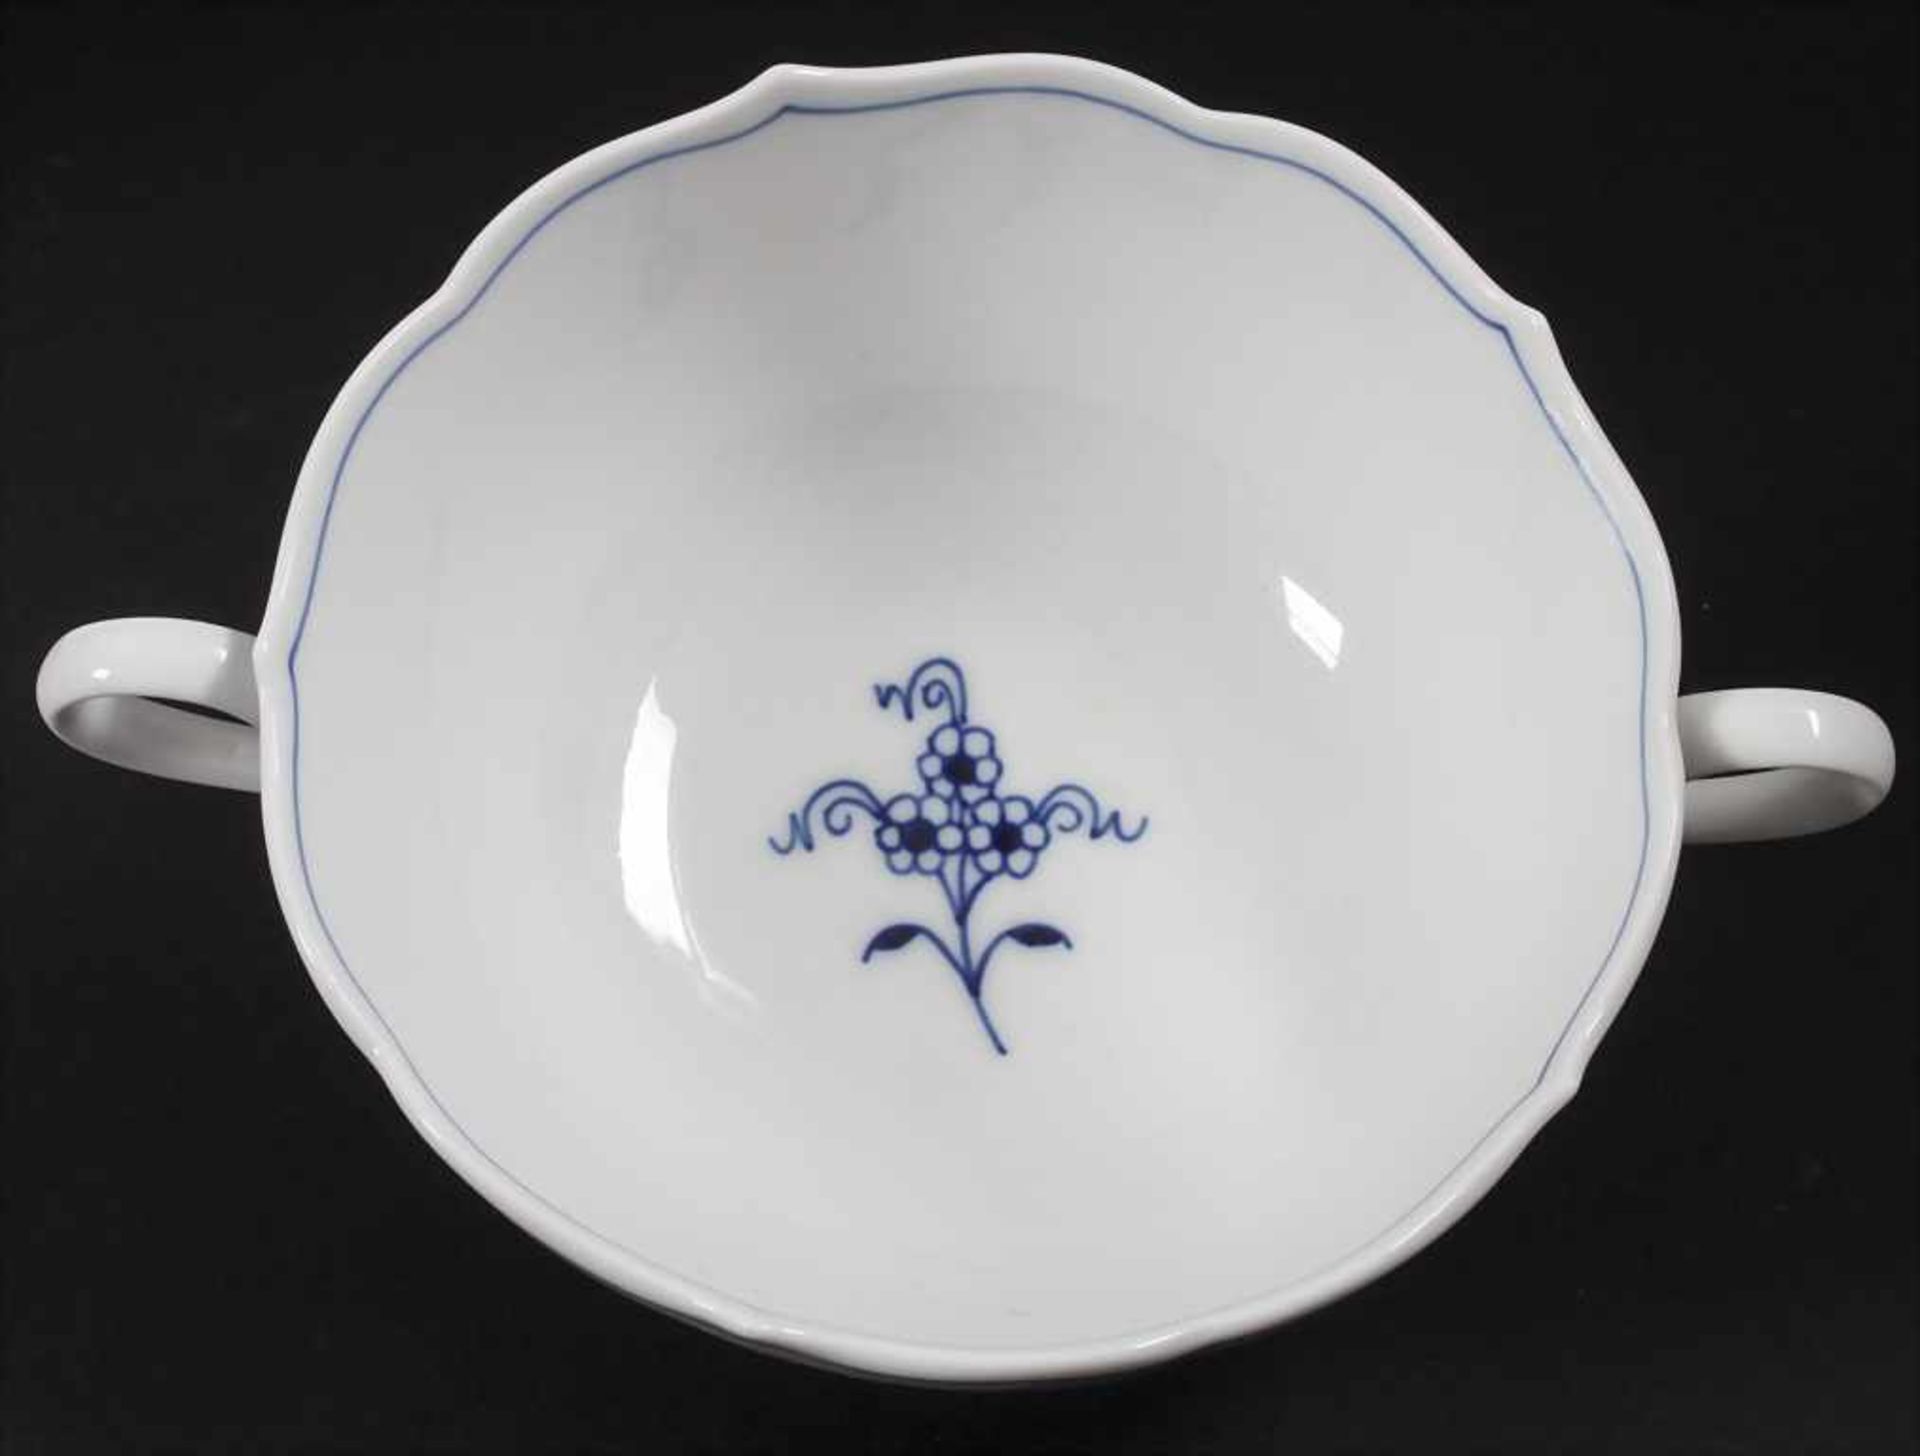 28 tlg. Service 'Zwiebelmuster' / A 28-piece dinner set with 'Onion Pattern', Meissen, 20. Jh. - Image 12 of 17